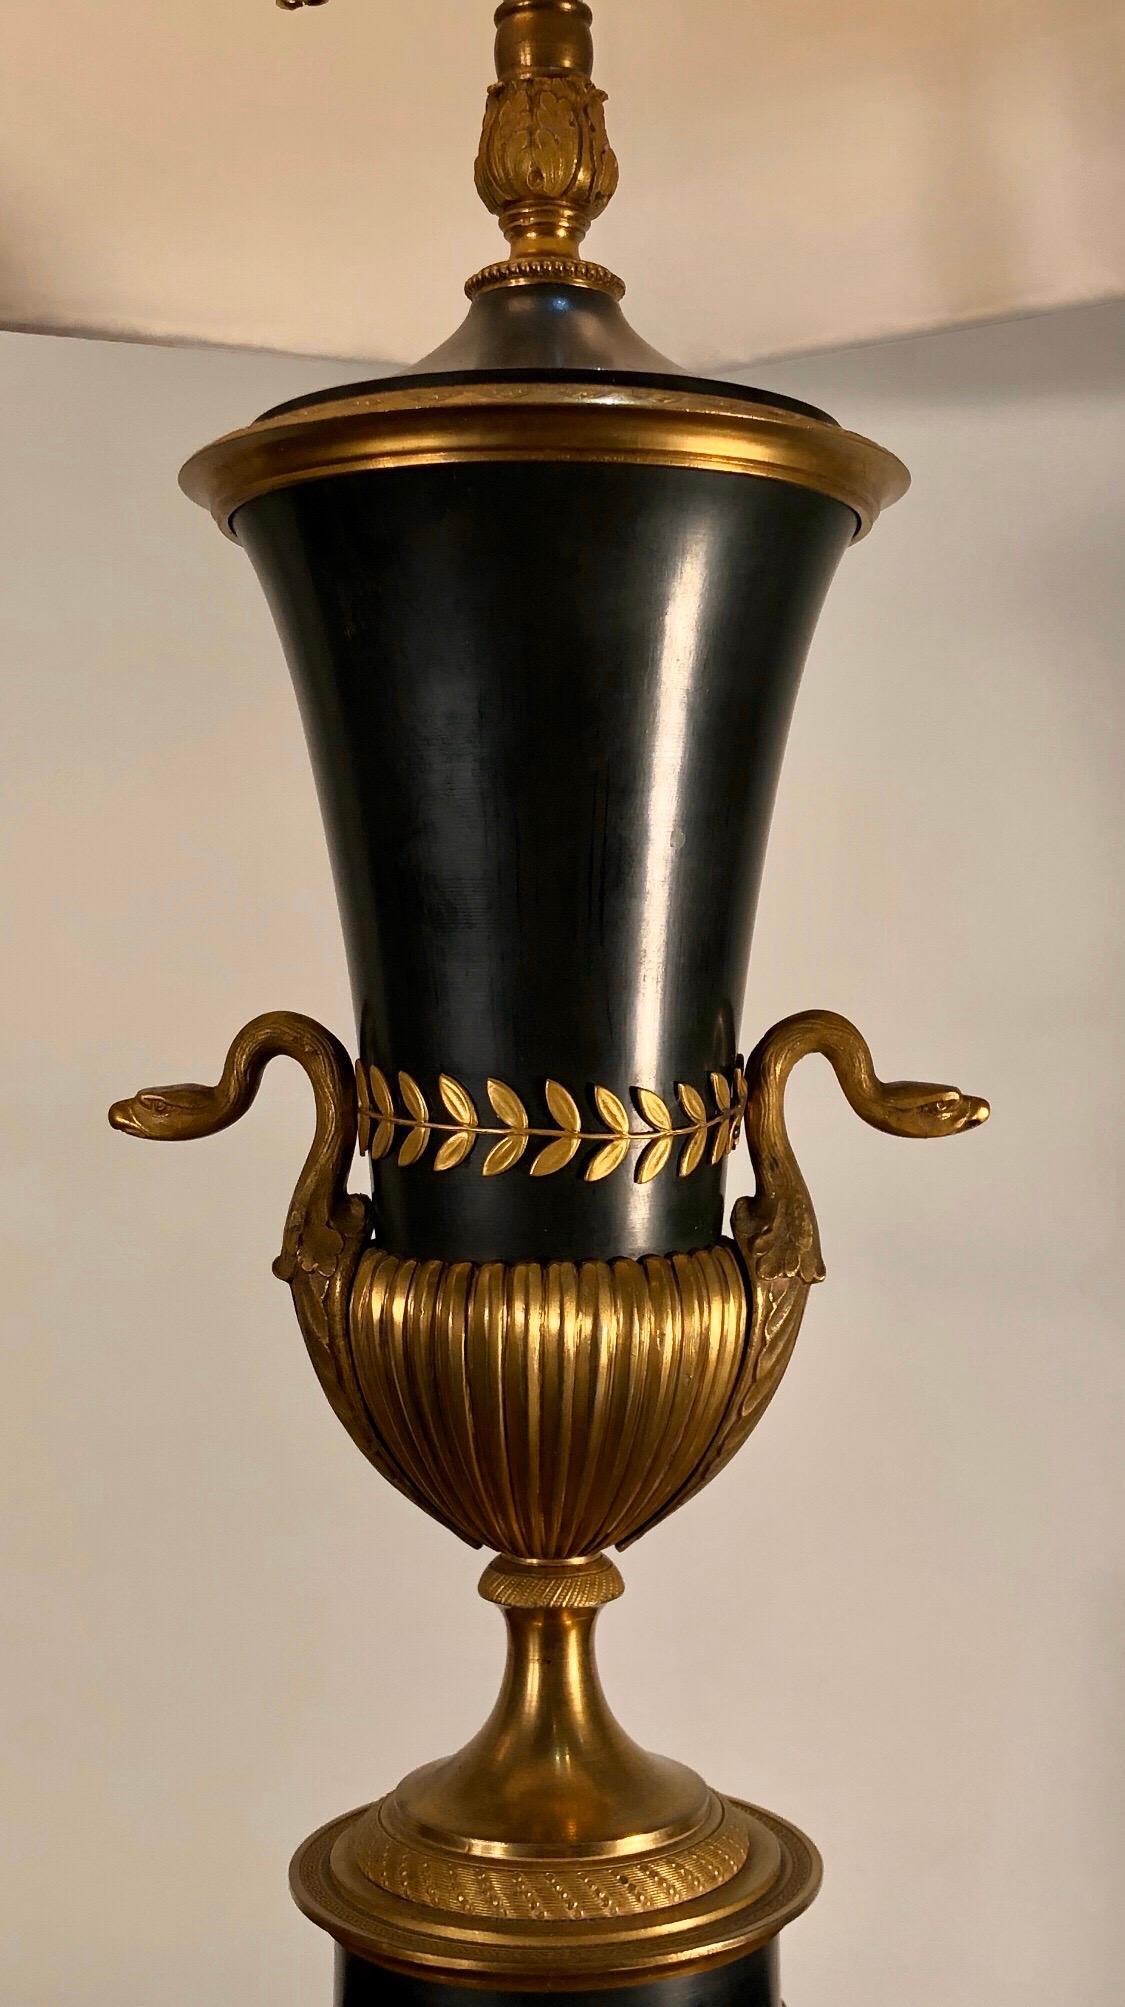 19th Century French Empire Lamps with Bronze Urns and Ormolu-Mounted Swans, Pair 2